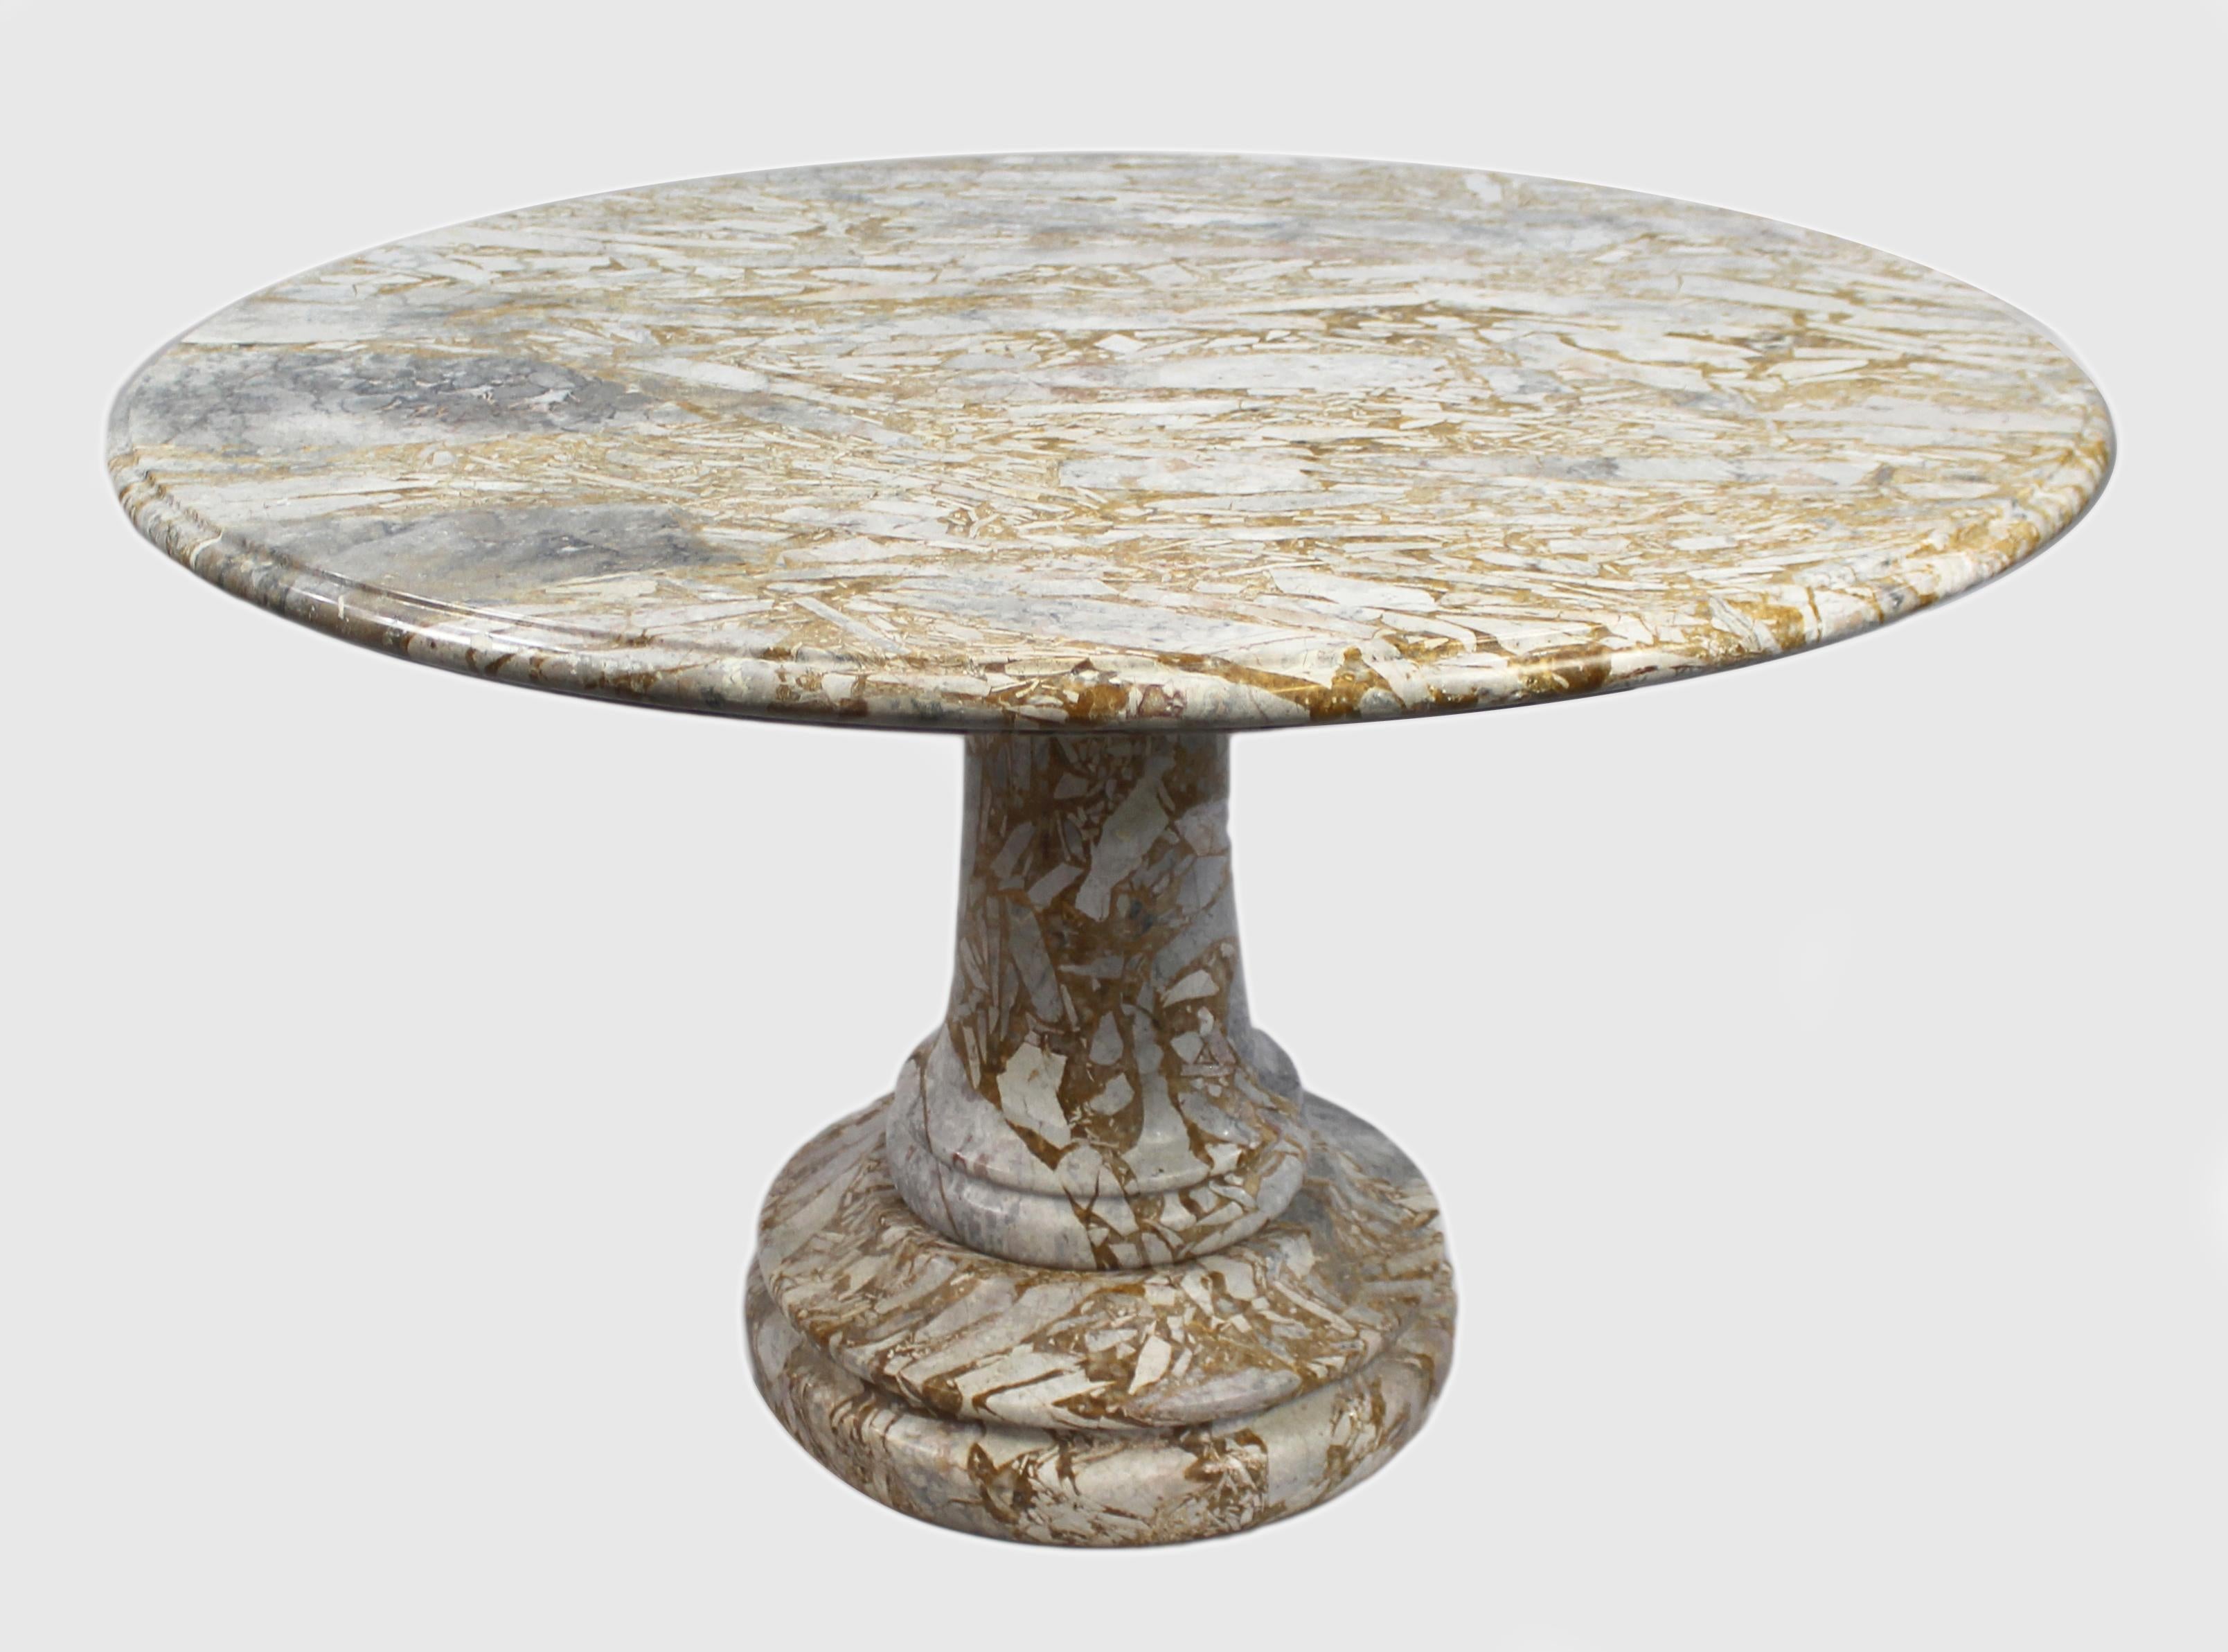 Emirian Fine Middle Eastern Circular Marble Table & 6 Stools